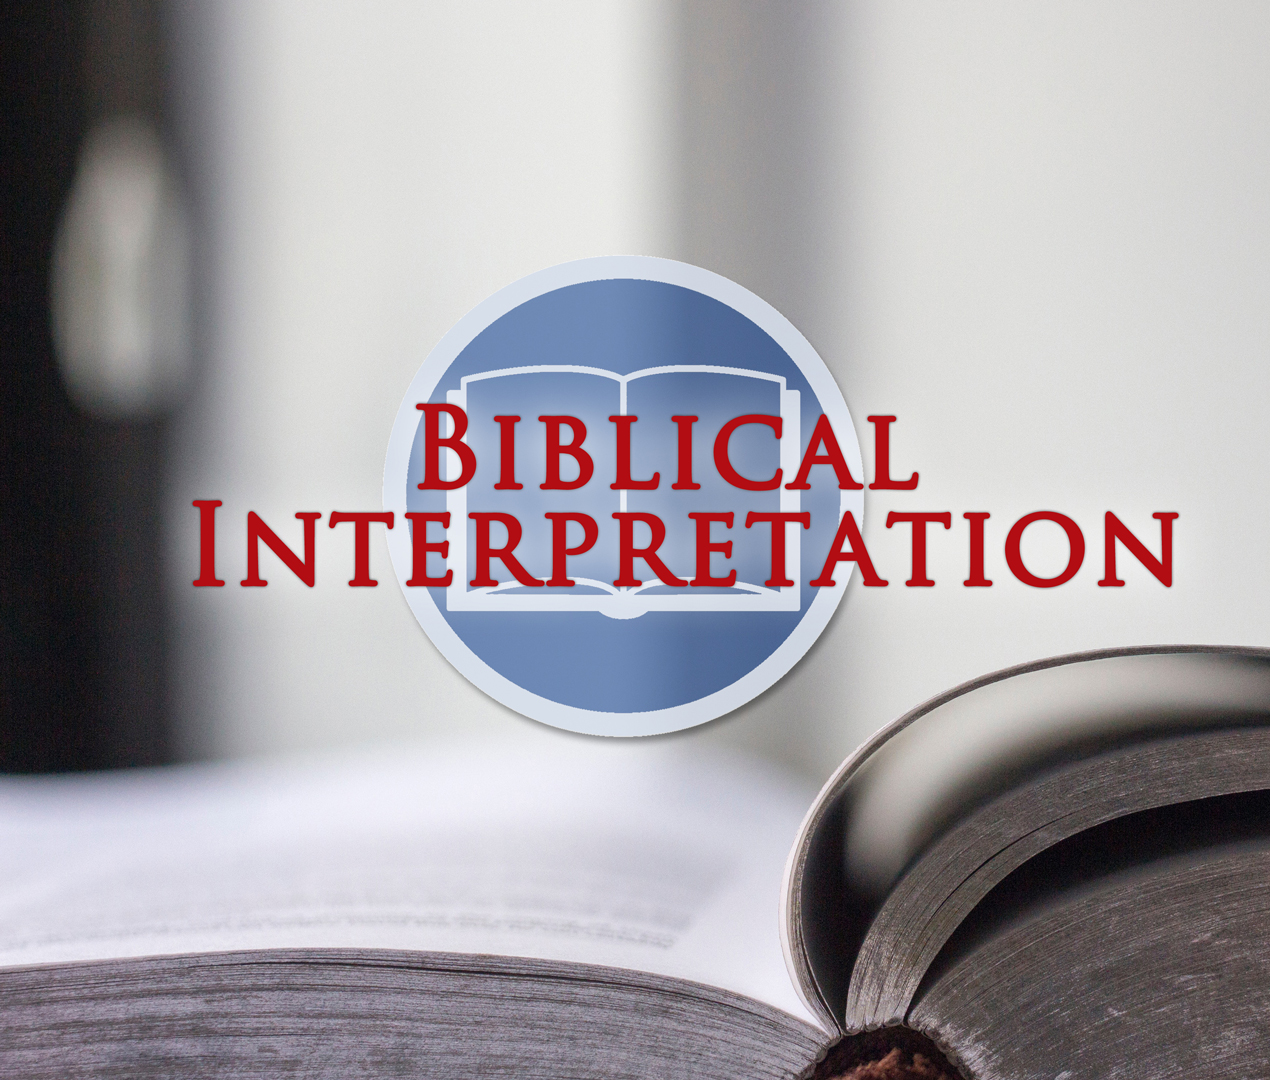 Biblical Interpretation: The Meeting Place of God - Pt 5 - Preached: 6/24/2018